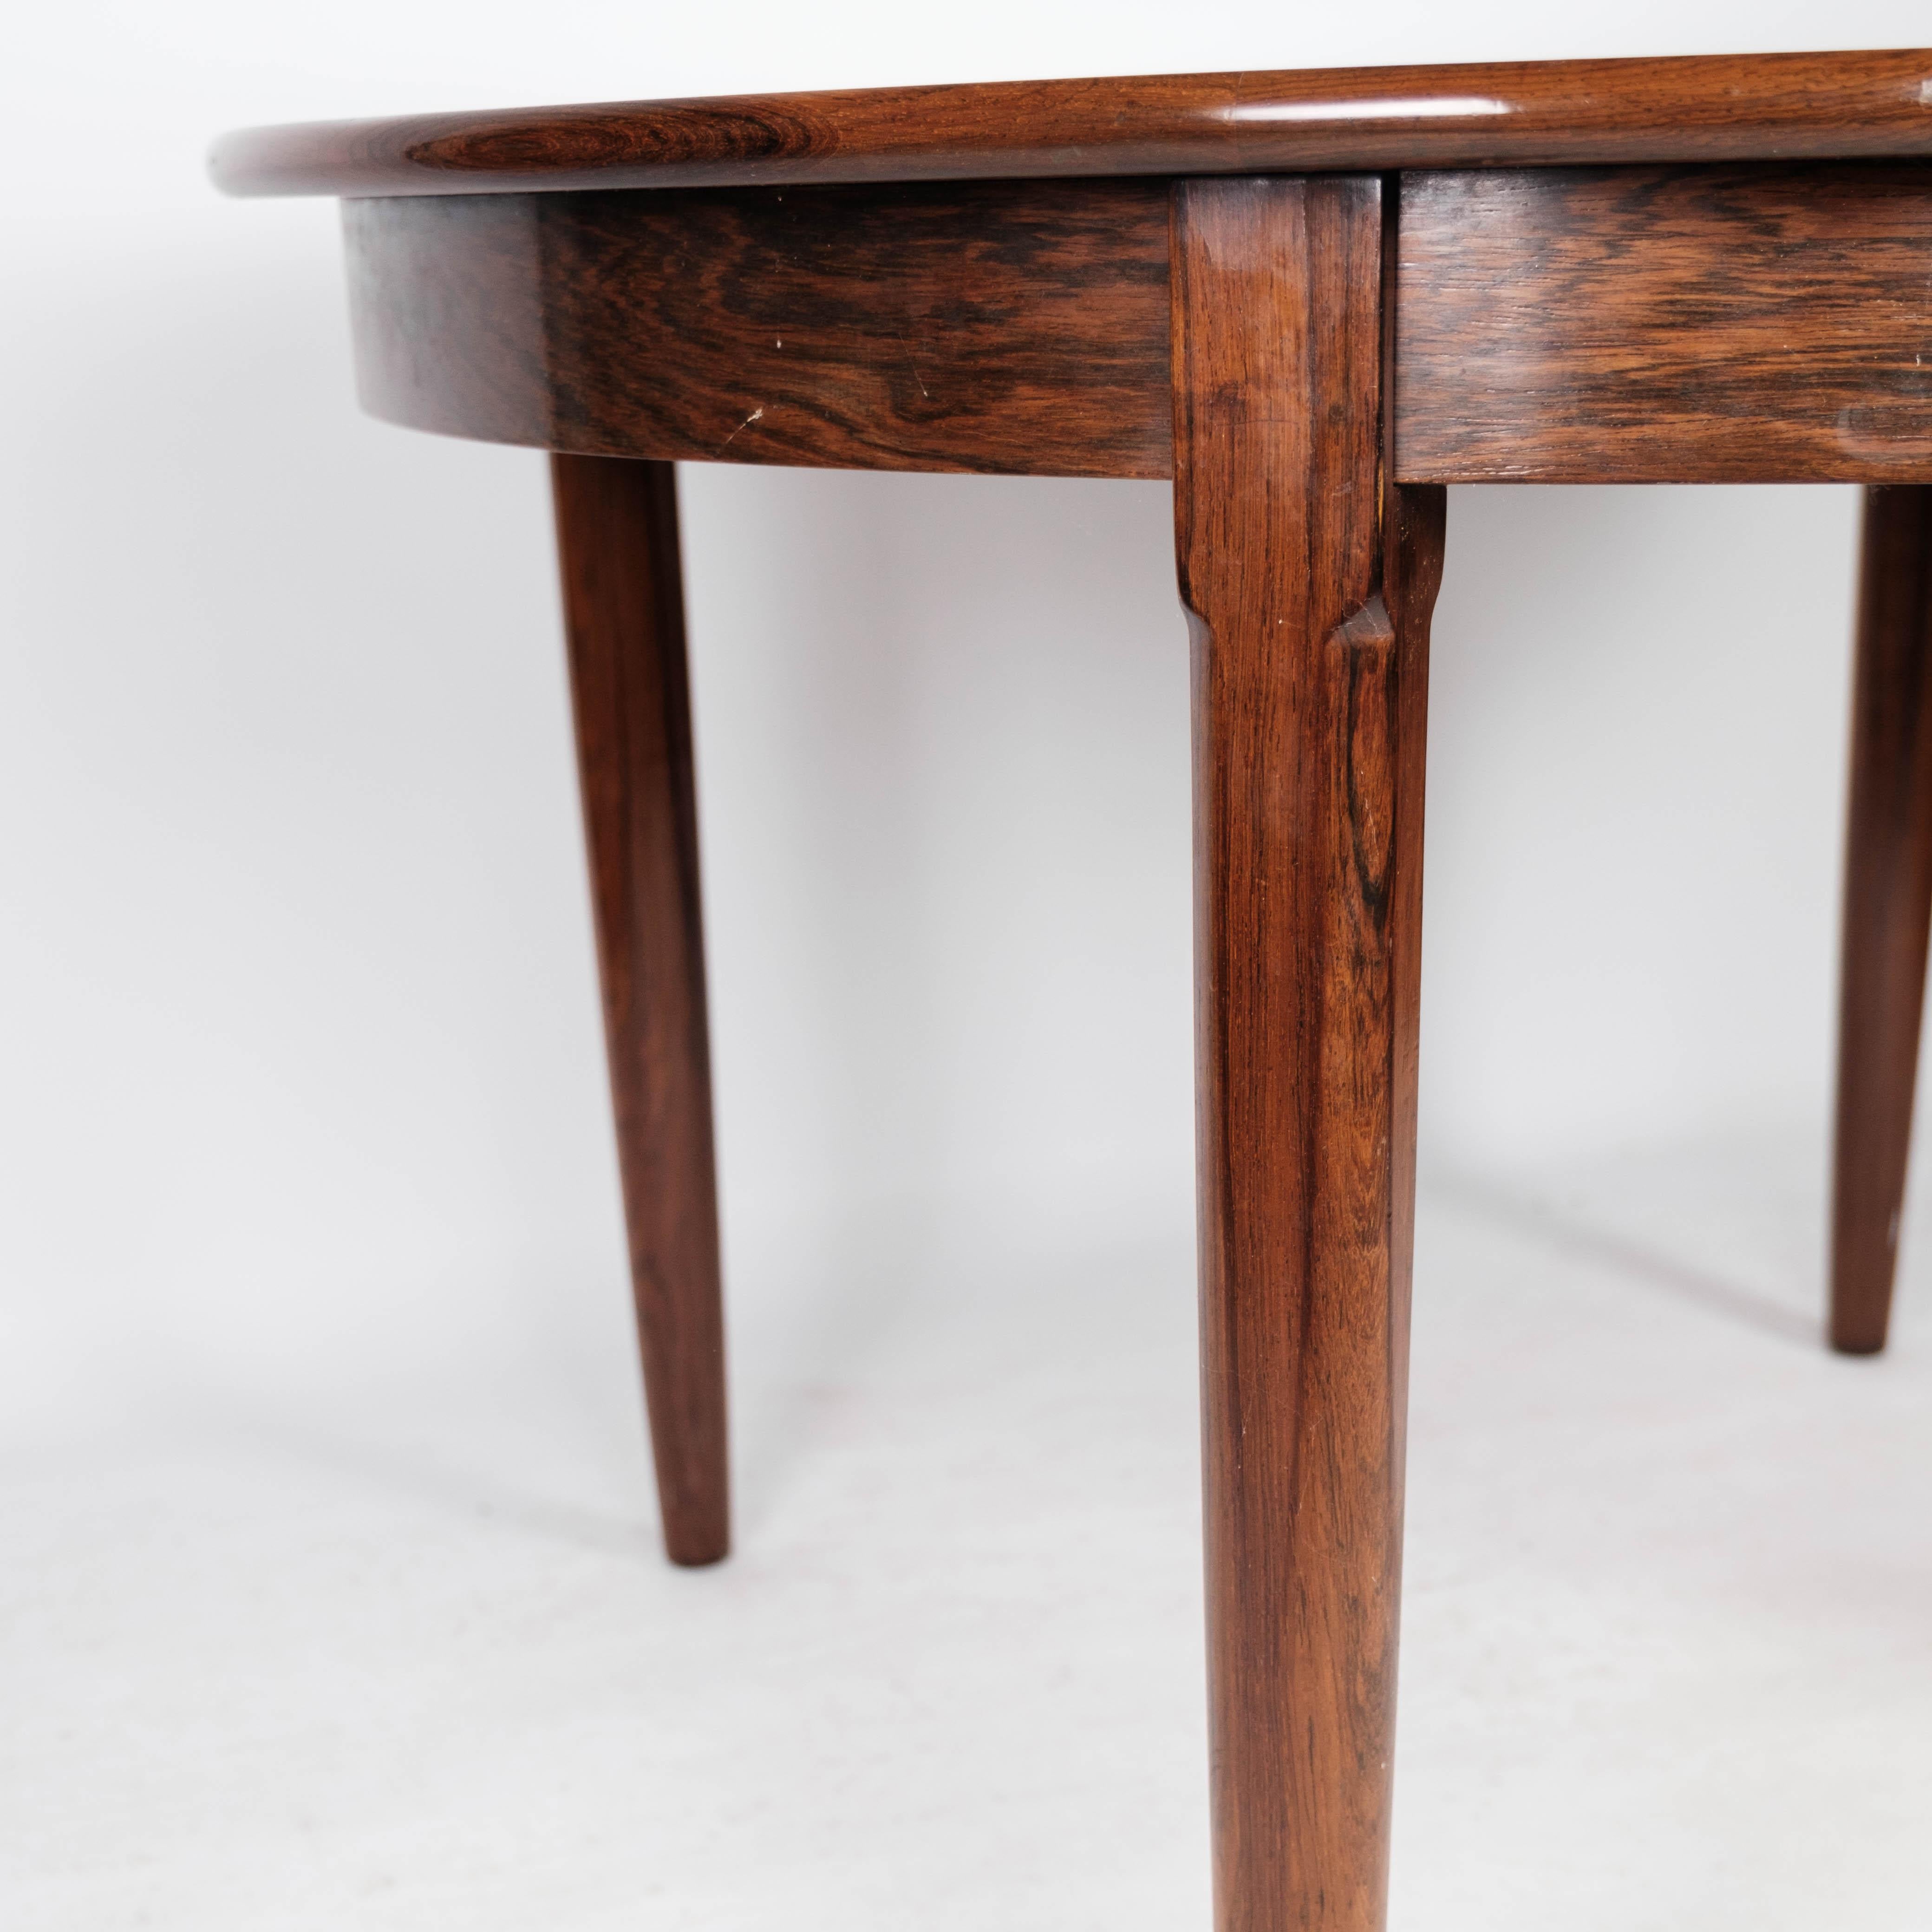 Dining Table Made In Rosewood With Extension, Danish Design From 1960s For Sale 1